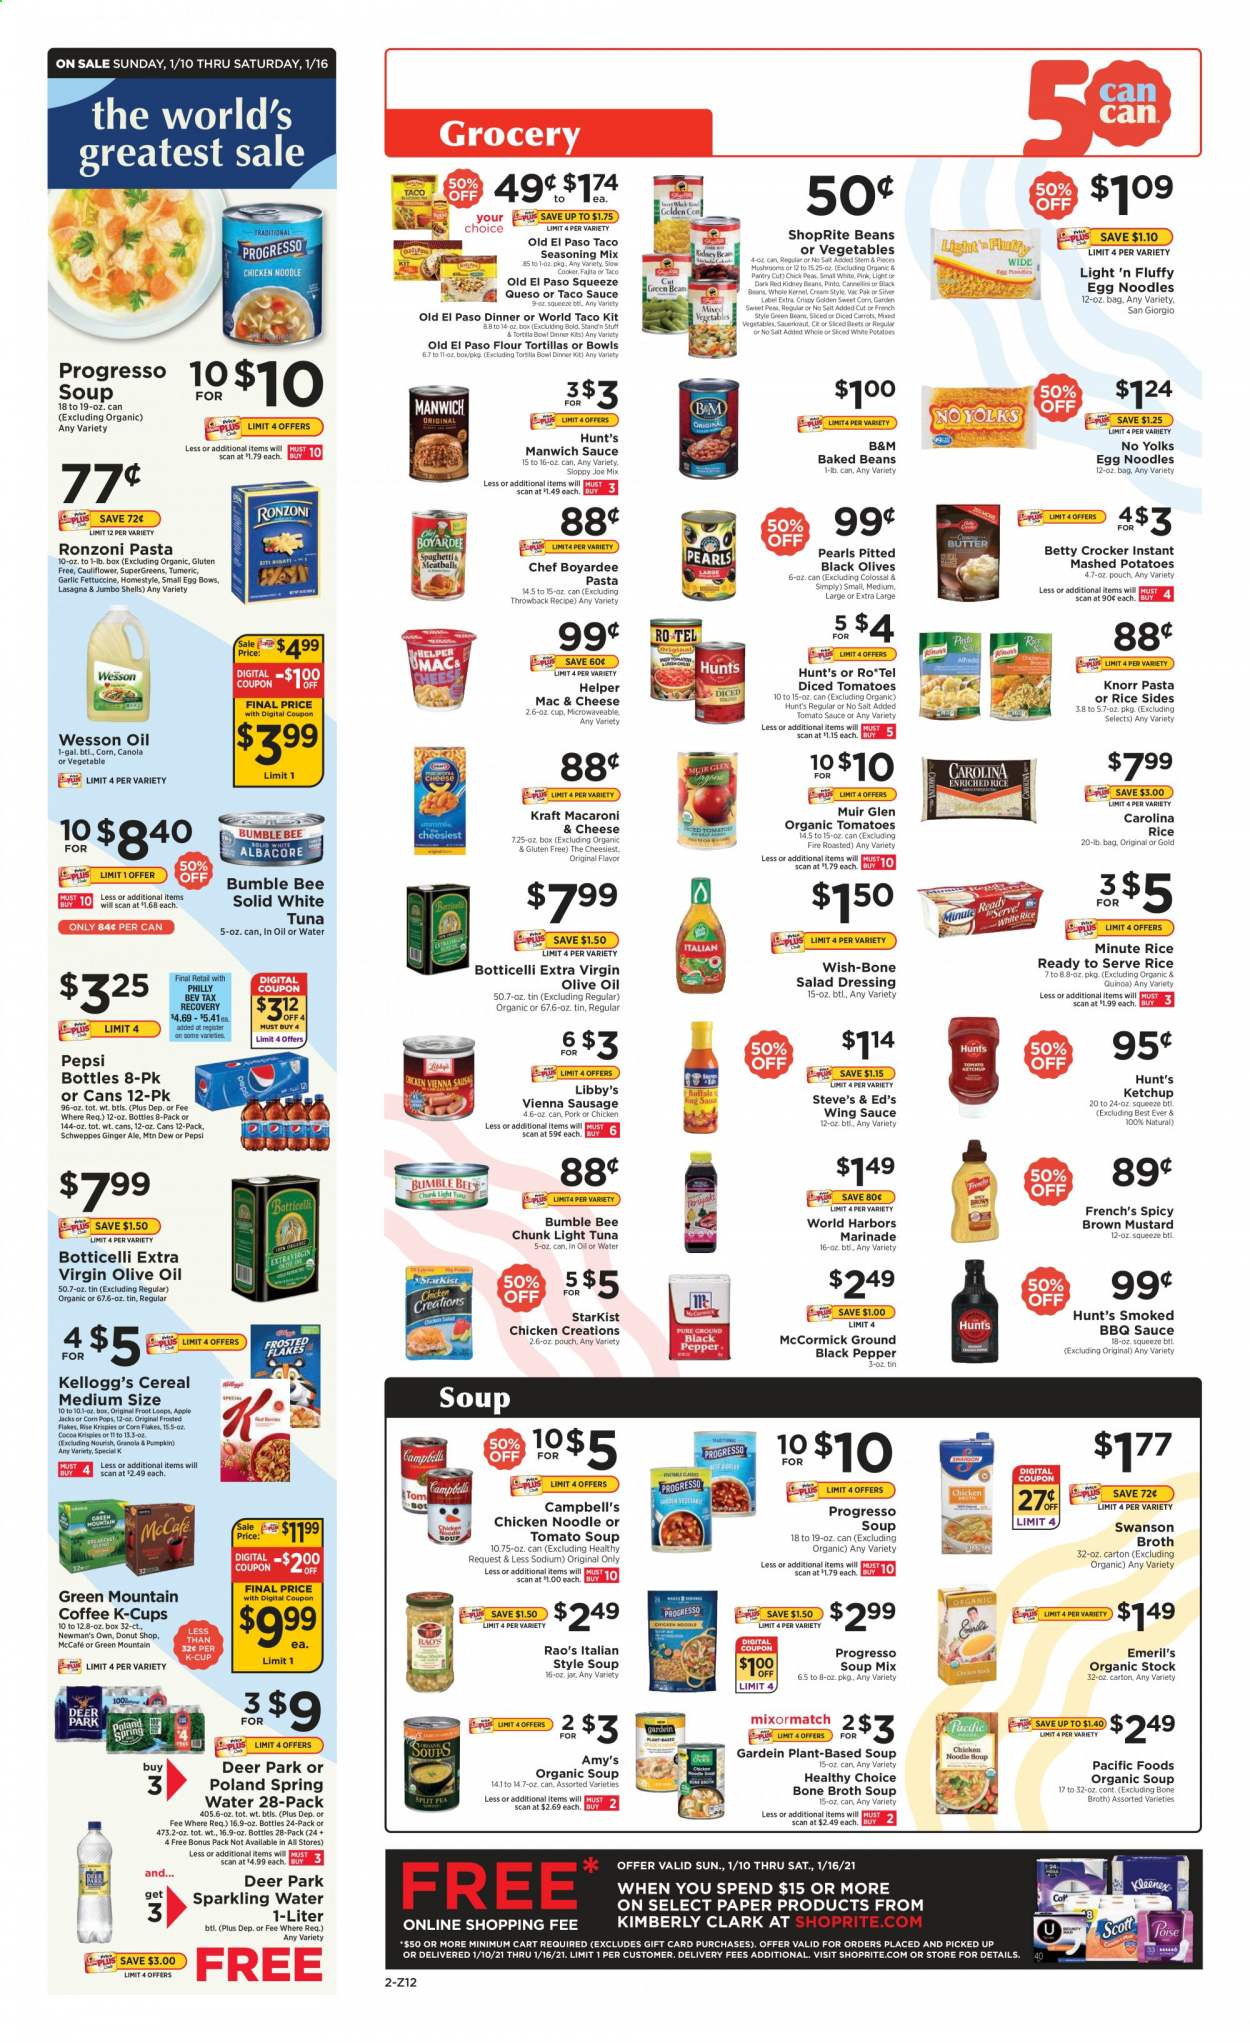 thumbnail - ShopRite Flyer - 01/10/2021 - 01/16/2021 - Sales products - mushrooms, tortillas, Old El Paso, tuna, StarKist, Campbell's, macaroni & cheese, mashed potatoes, tomato soup, soup mix, Knorr, dinner kit, fajita, Progresso, lasagna meal, Healthy Choice, Kraft®, sausage, vienna sausage, beans, carrots, cauliflower, peas, mixed vegetables, green beans, sweet corn, Kellogg's, cocoa, broth, garlic, sauerkraut, kidney beans, olives, light tuna, baked beans, Manwich, Chef Boyardee, cereals, granola, corn flakes, Frosted Flakes, Corn Pops, black beans, quinoa, egg noodles, pasta, noodles, marinade, BBQ sauce, mustard, salad dressing, taco sauce, tomato sauce, ketchup, dressing, wing sauce, extra virgin olive oil, olive oil, ginger ale, Mountain Dew, Schweppes, Pepsi, spring water, sparkling water, coffee capsules, McCafe, K-Cups, Green Mountain, bowl, paper. Page 2.